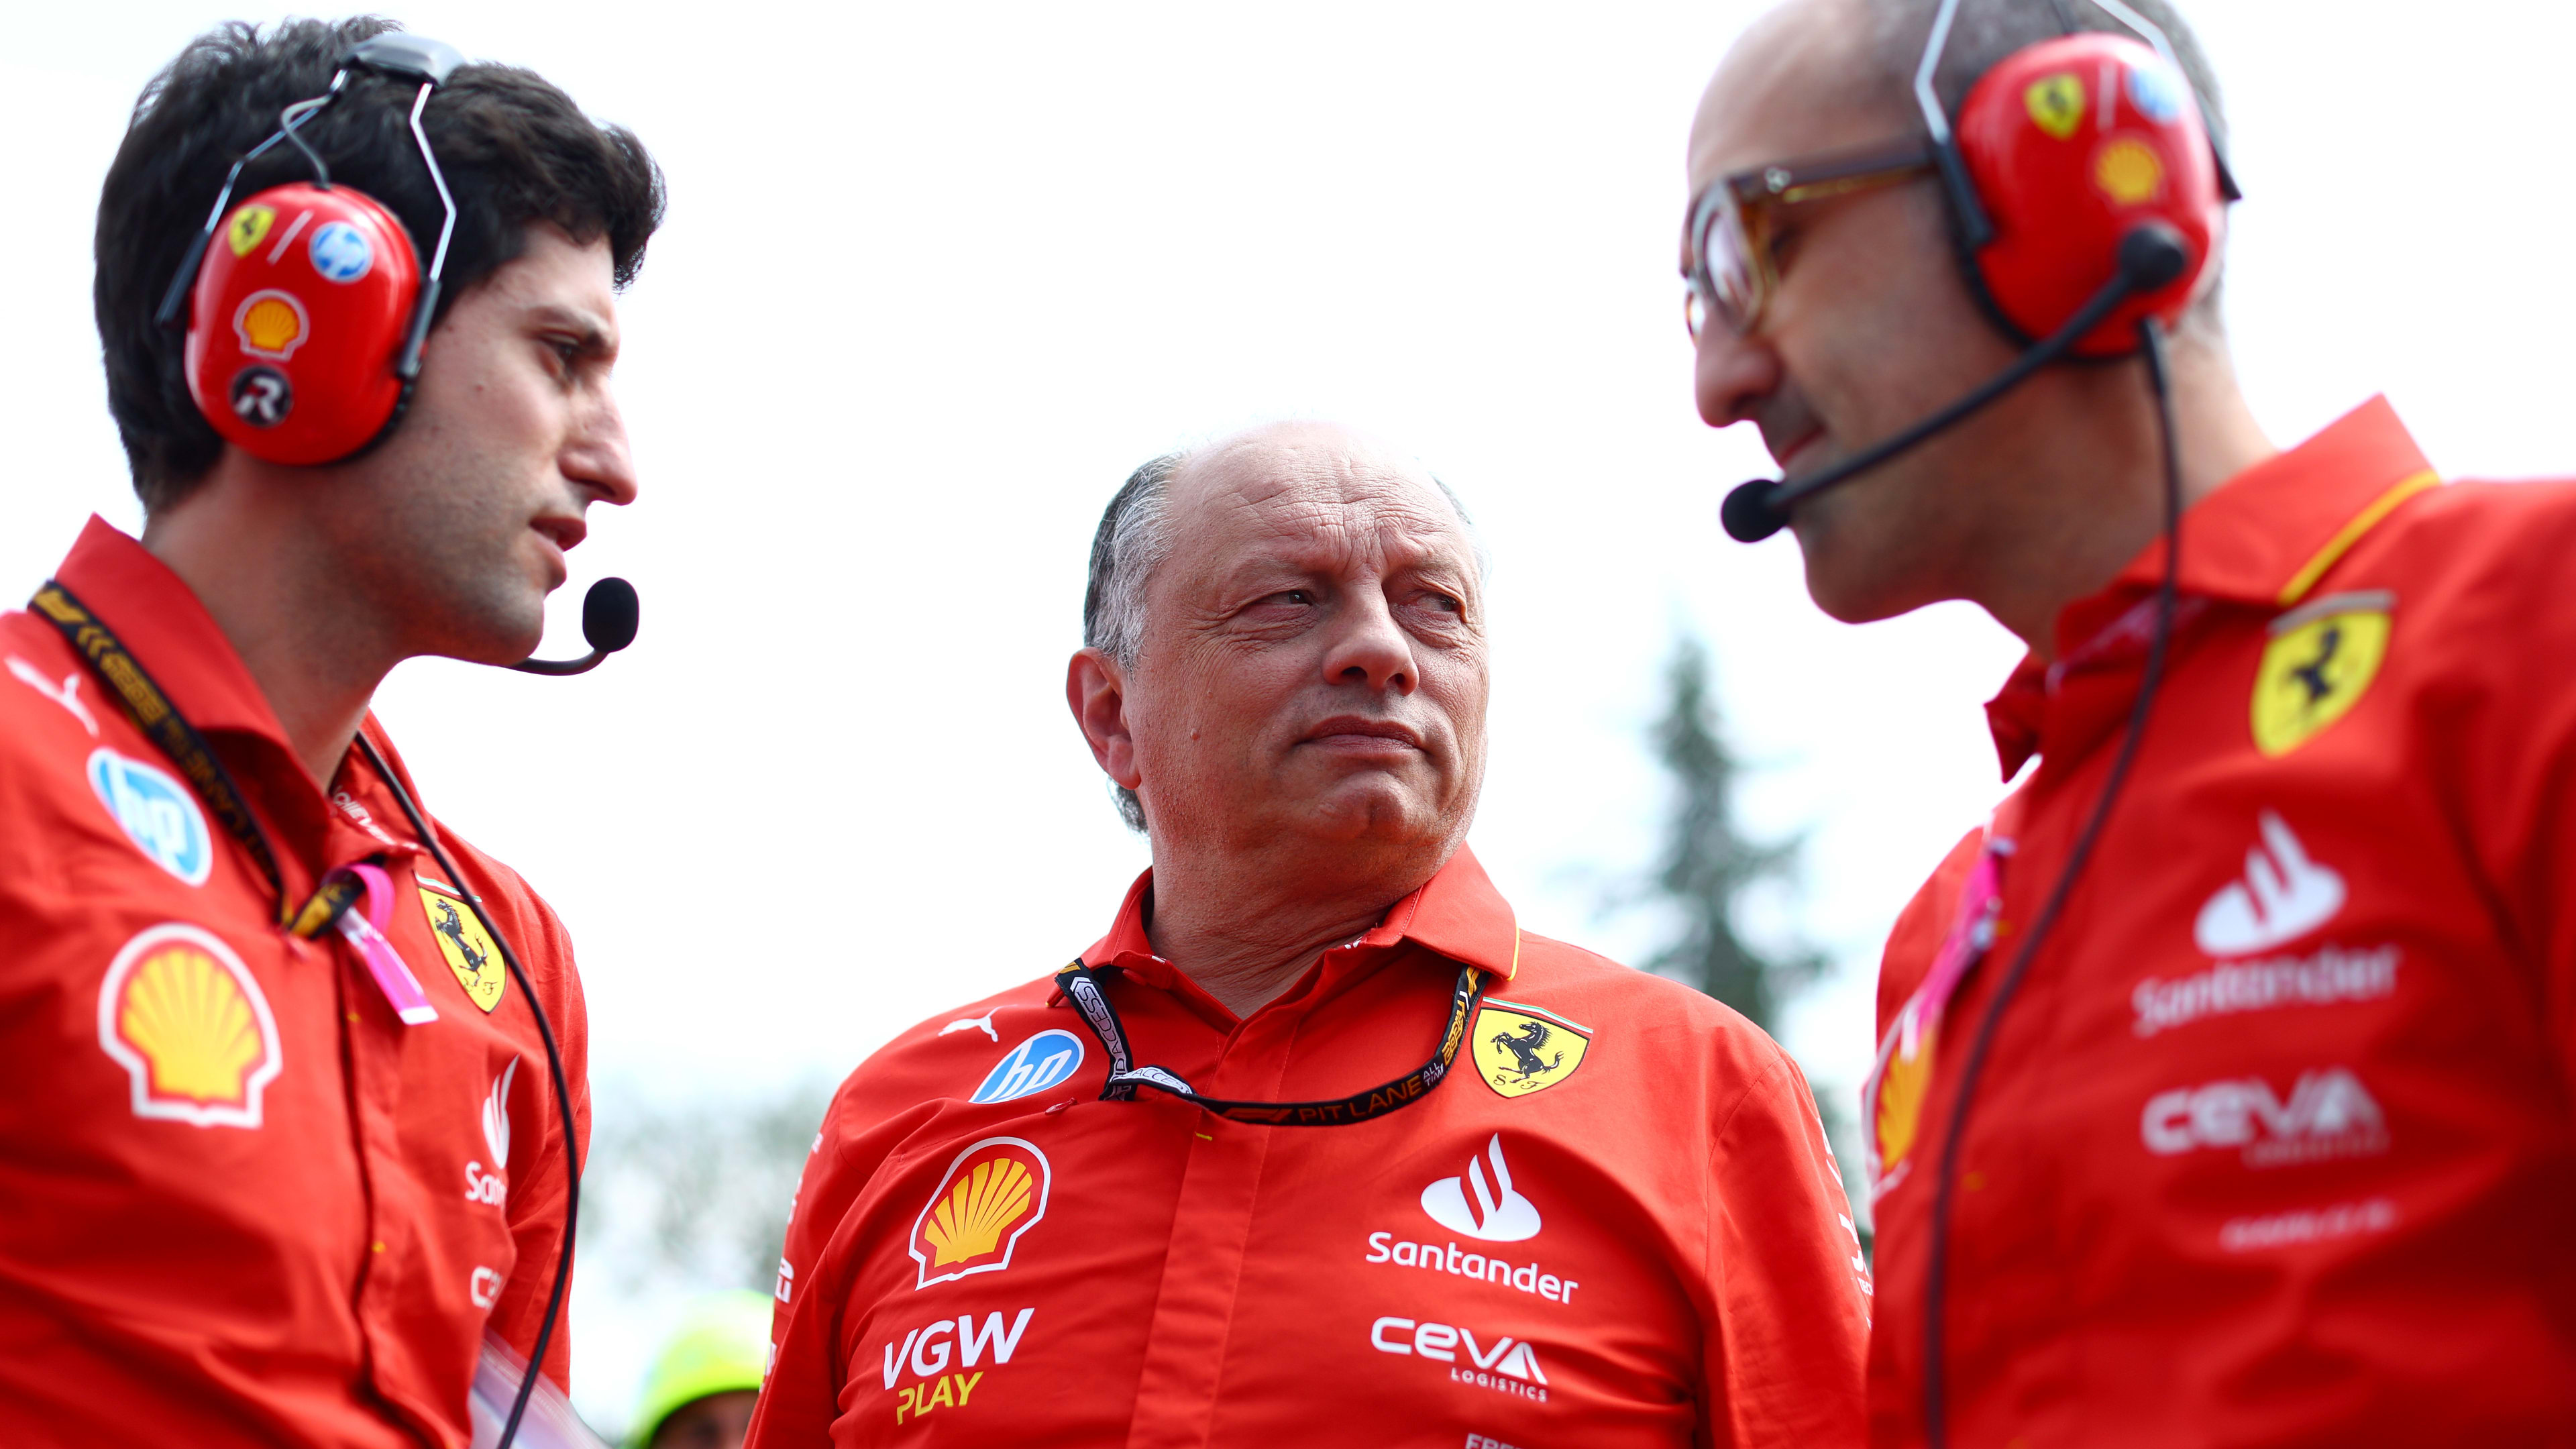 Vasseur says Ferrari and McLaren can ‘come back at Red Bull’ as he makes ‘gamechanger’ title race forecast